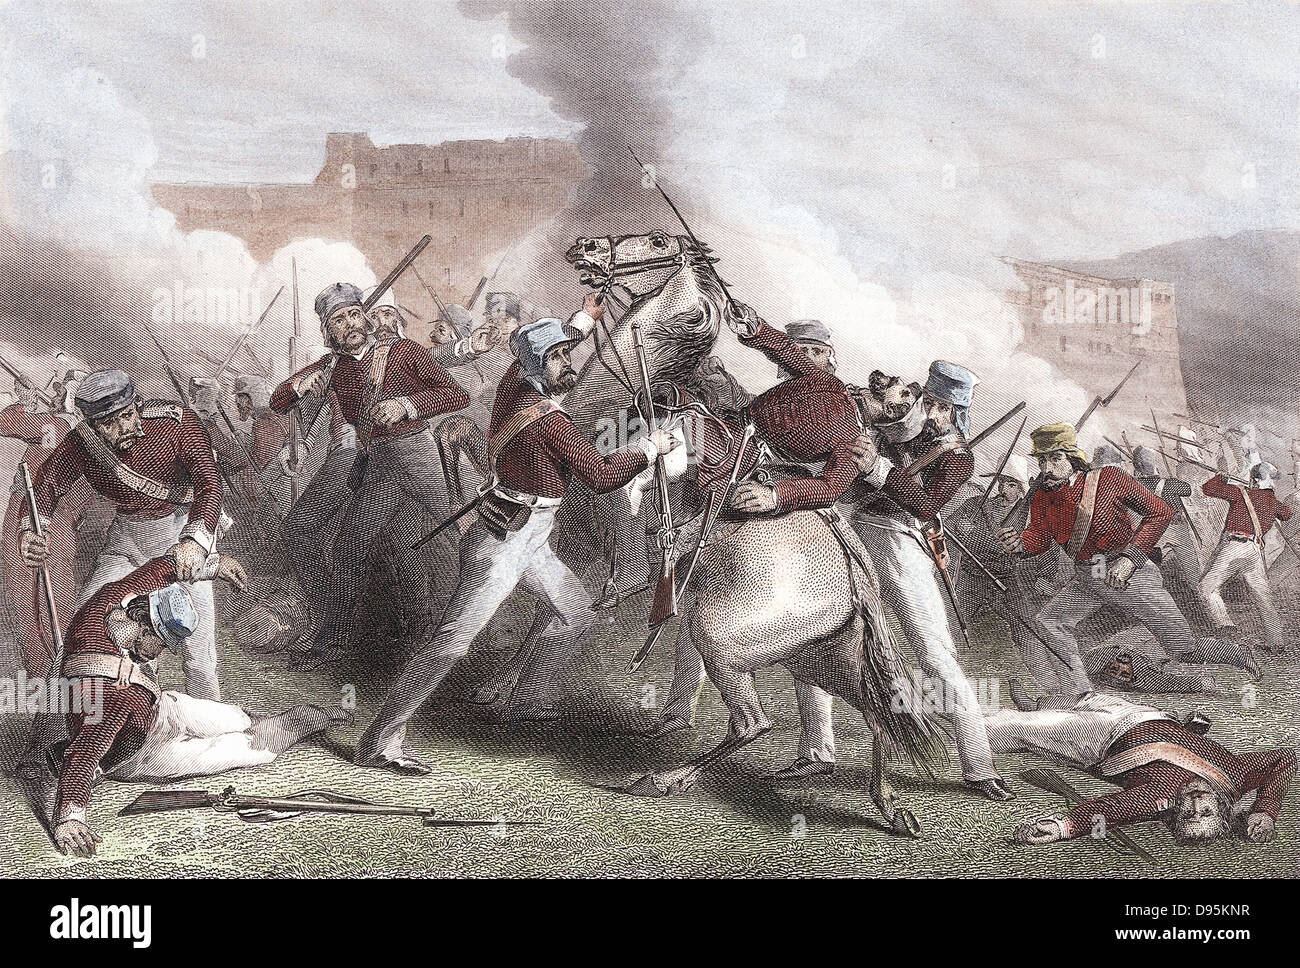 Indian Mutiny 1857-1859, also known as the Sepoy Mutiny or the Great War of Independence: Death of Brigadier Adrian Hope during British attack on Fort Roodamow 15 April 1858. Hand-coloured engraving. Stock Photo